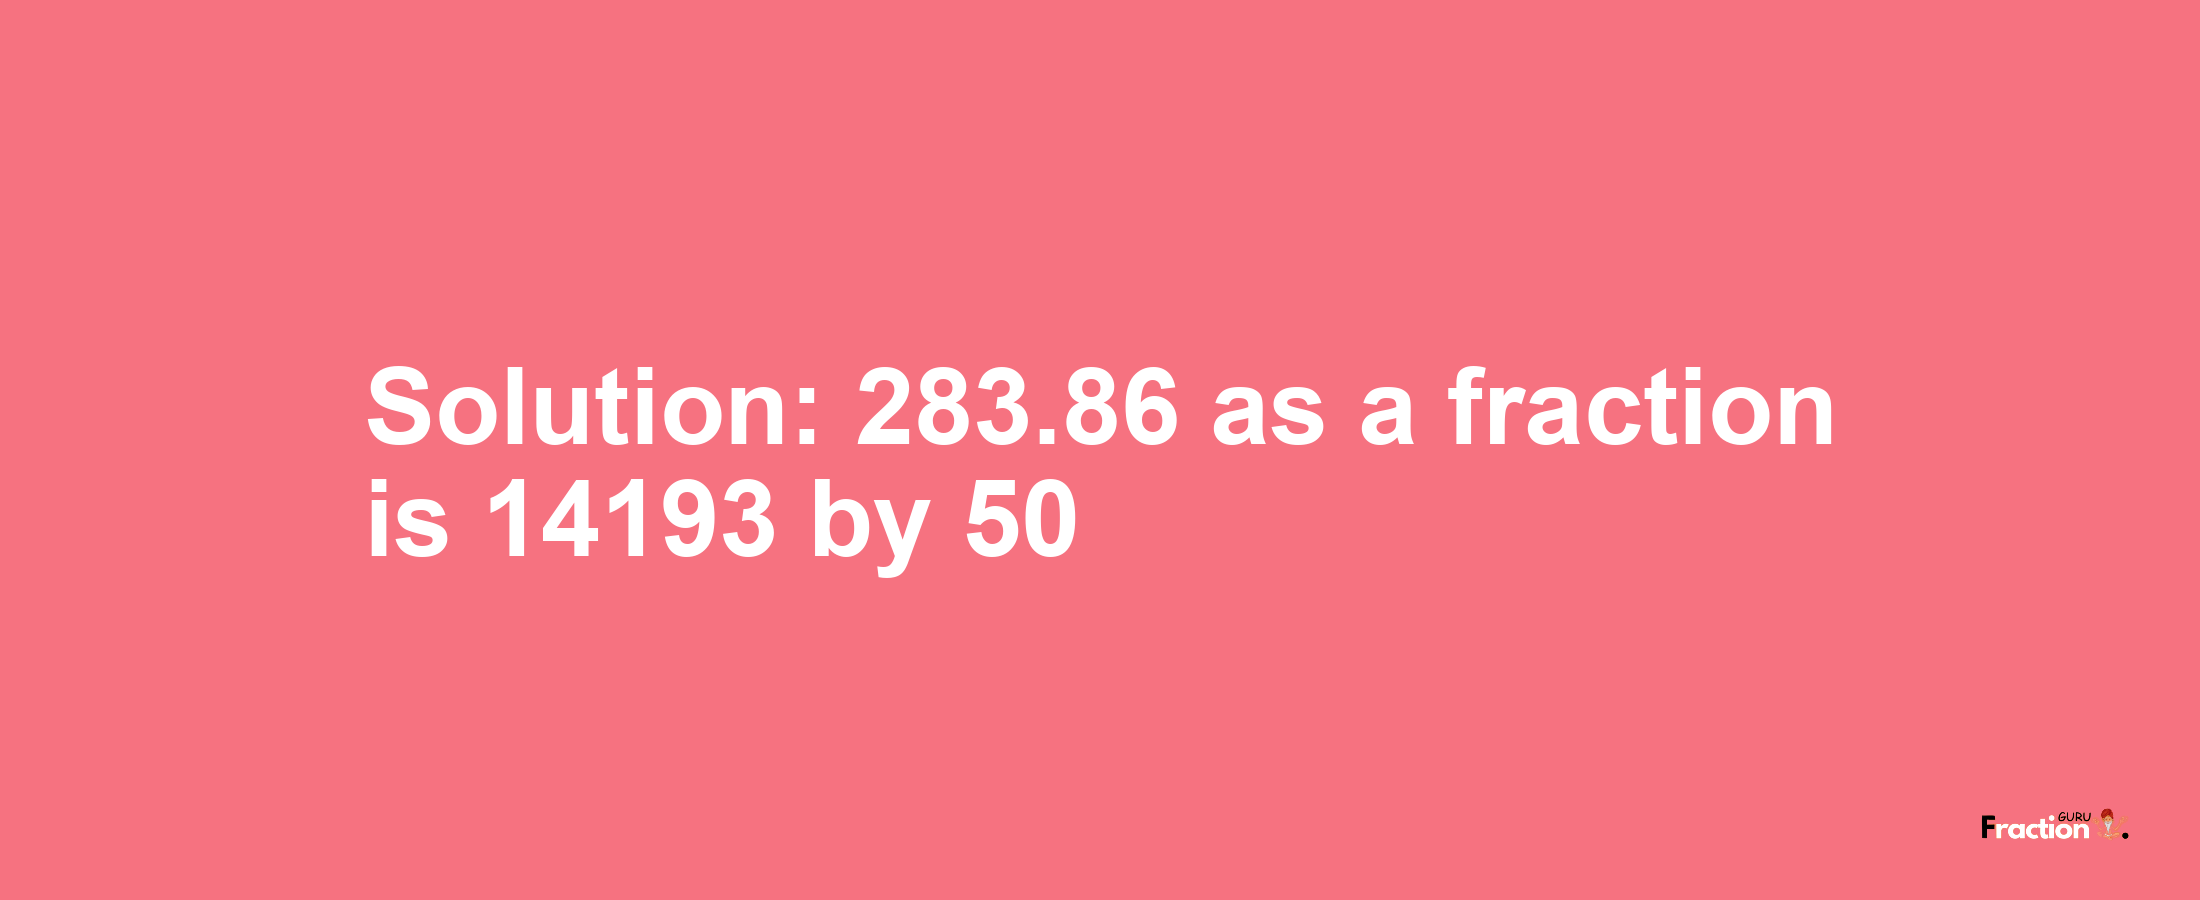 Solution:283.86 as a fraction is 14193/50